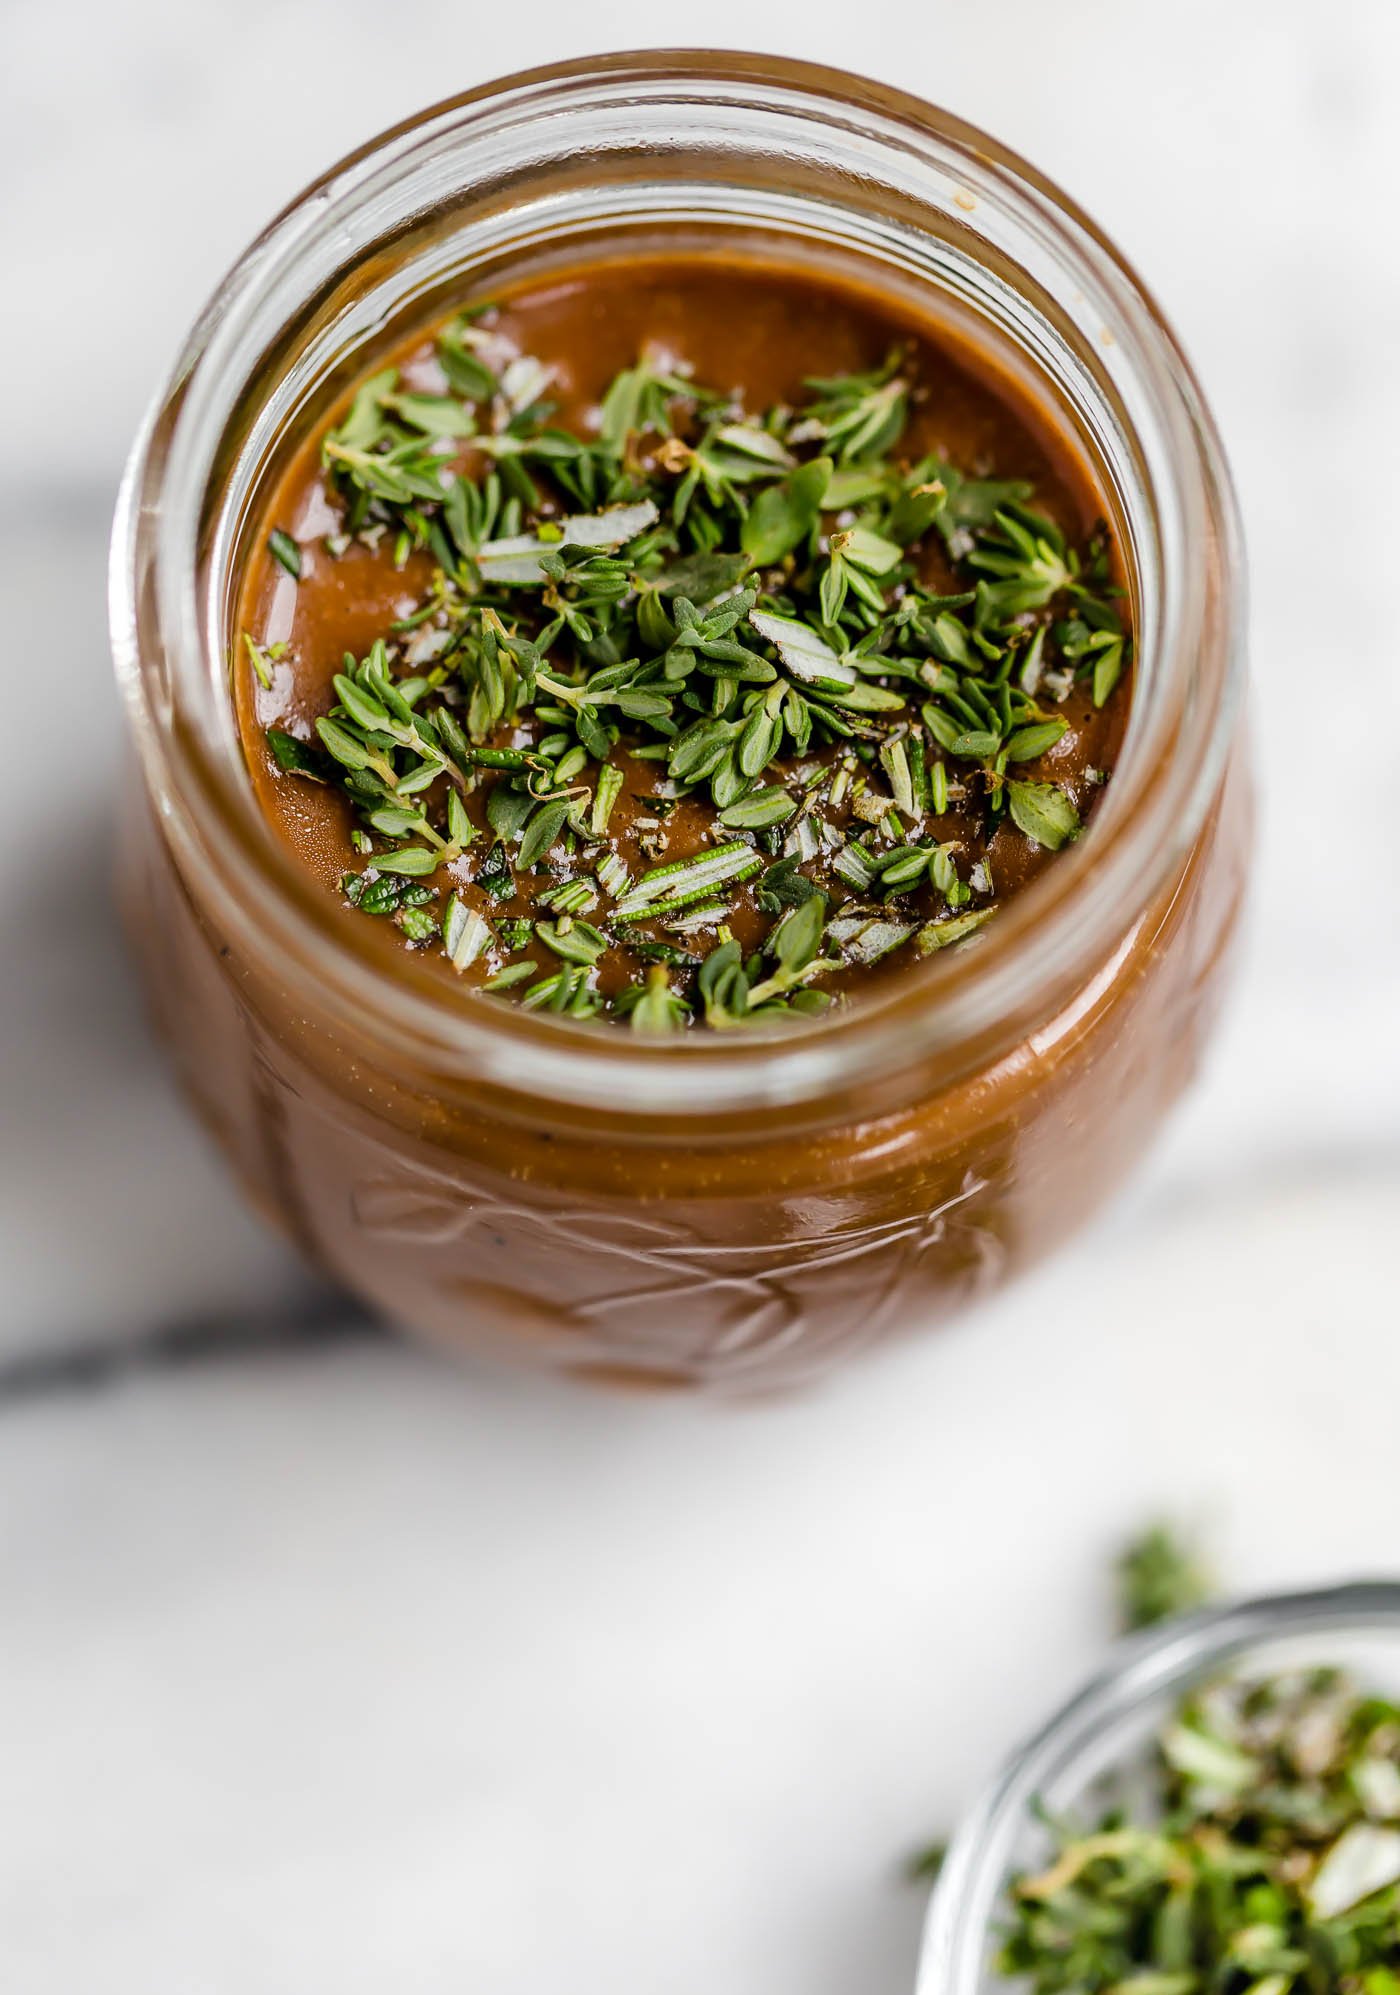 maple balsamic vinaigrette. a simple, but delicious balsamic vinaigrette recipe with pure maple syrup and freshly chopped rosemary & thyme. it takes less than 5 minutes to prep this quick & creamy balsamic vinaigrette, & it’s sure to take any salad to the next level! #playswellwithbutter #balsamicvinaigrette #balsamicvinaigrettedressing #balsamicdressing #saladdressingrecipes #saladdressing #creamybalsamicdressing